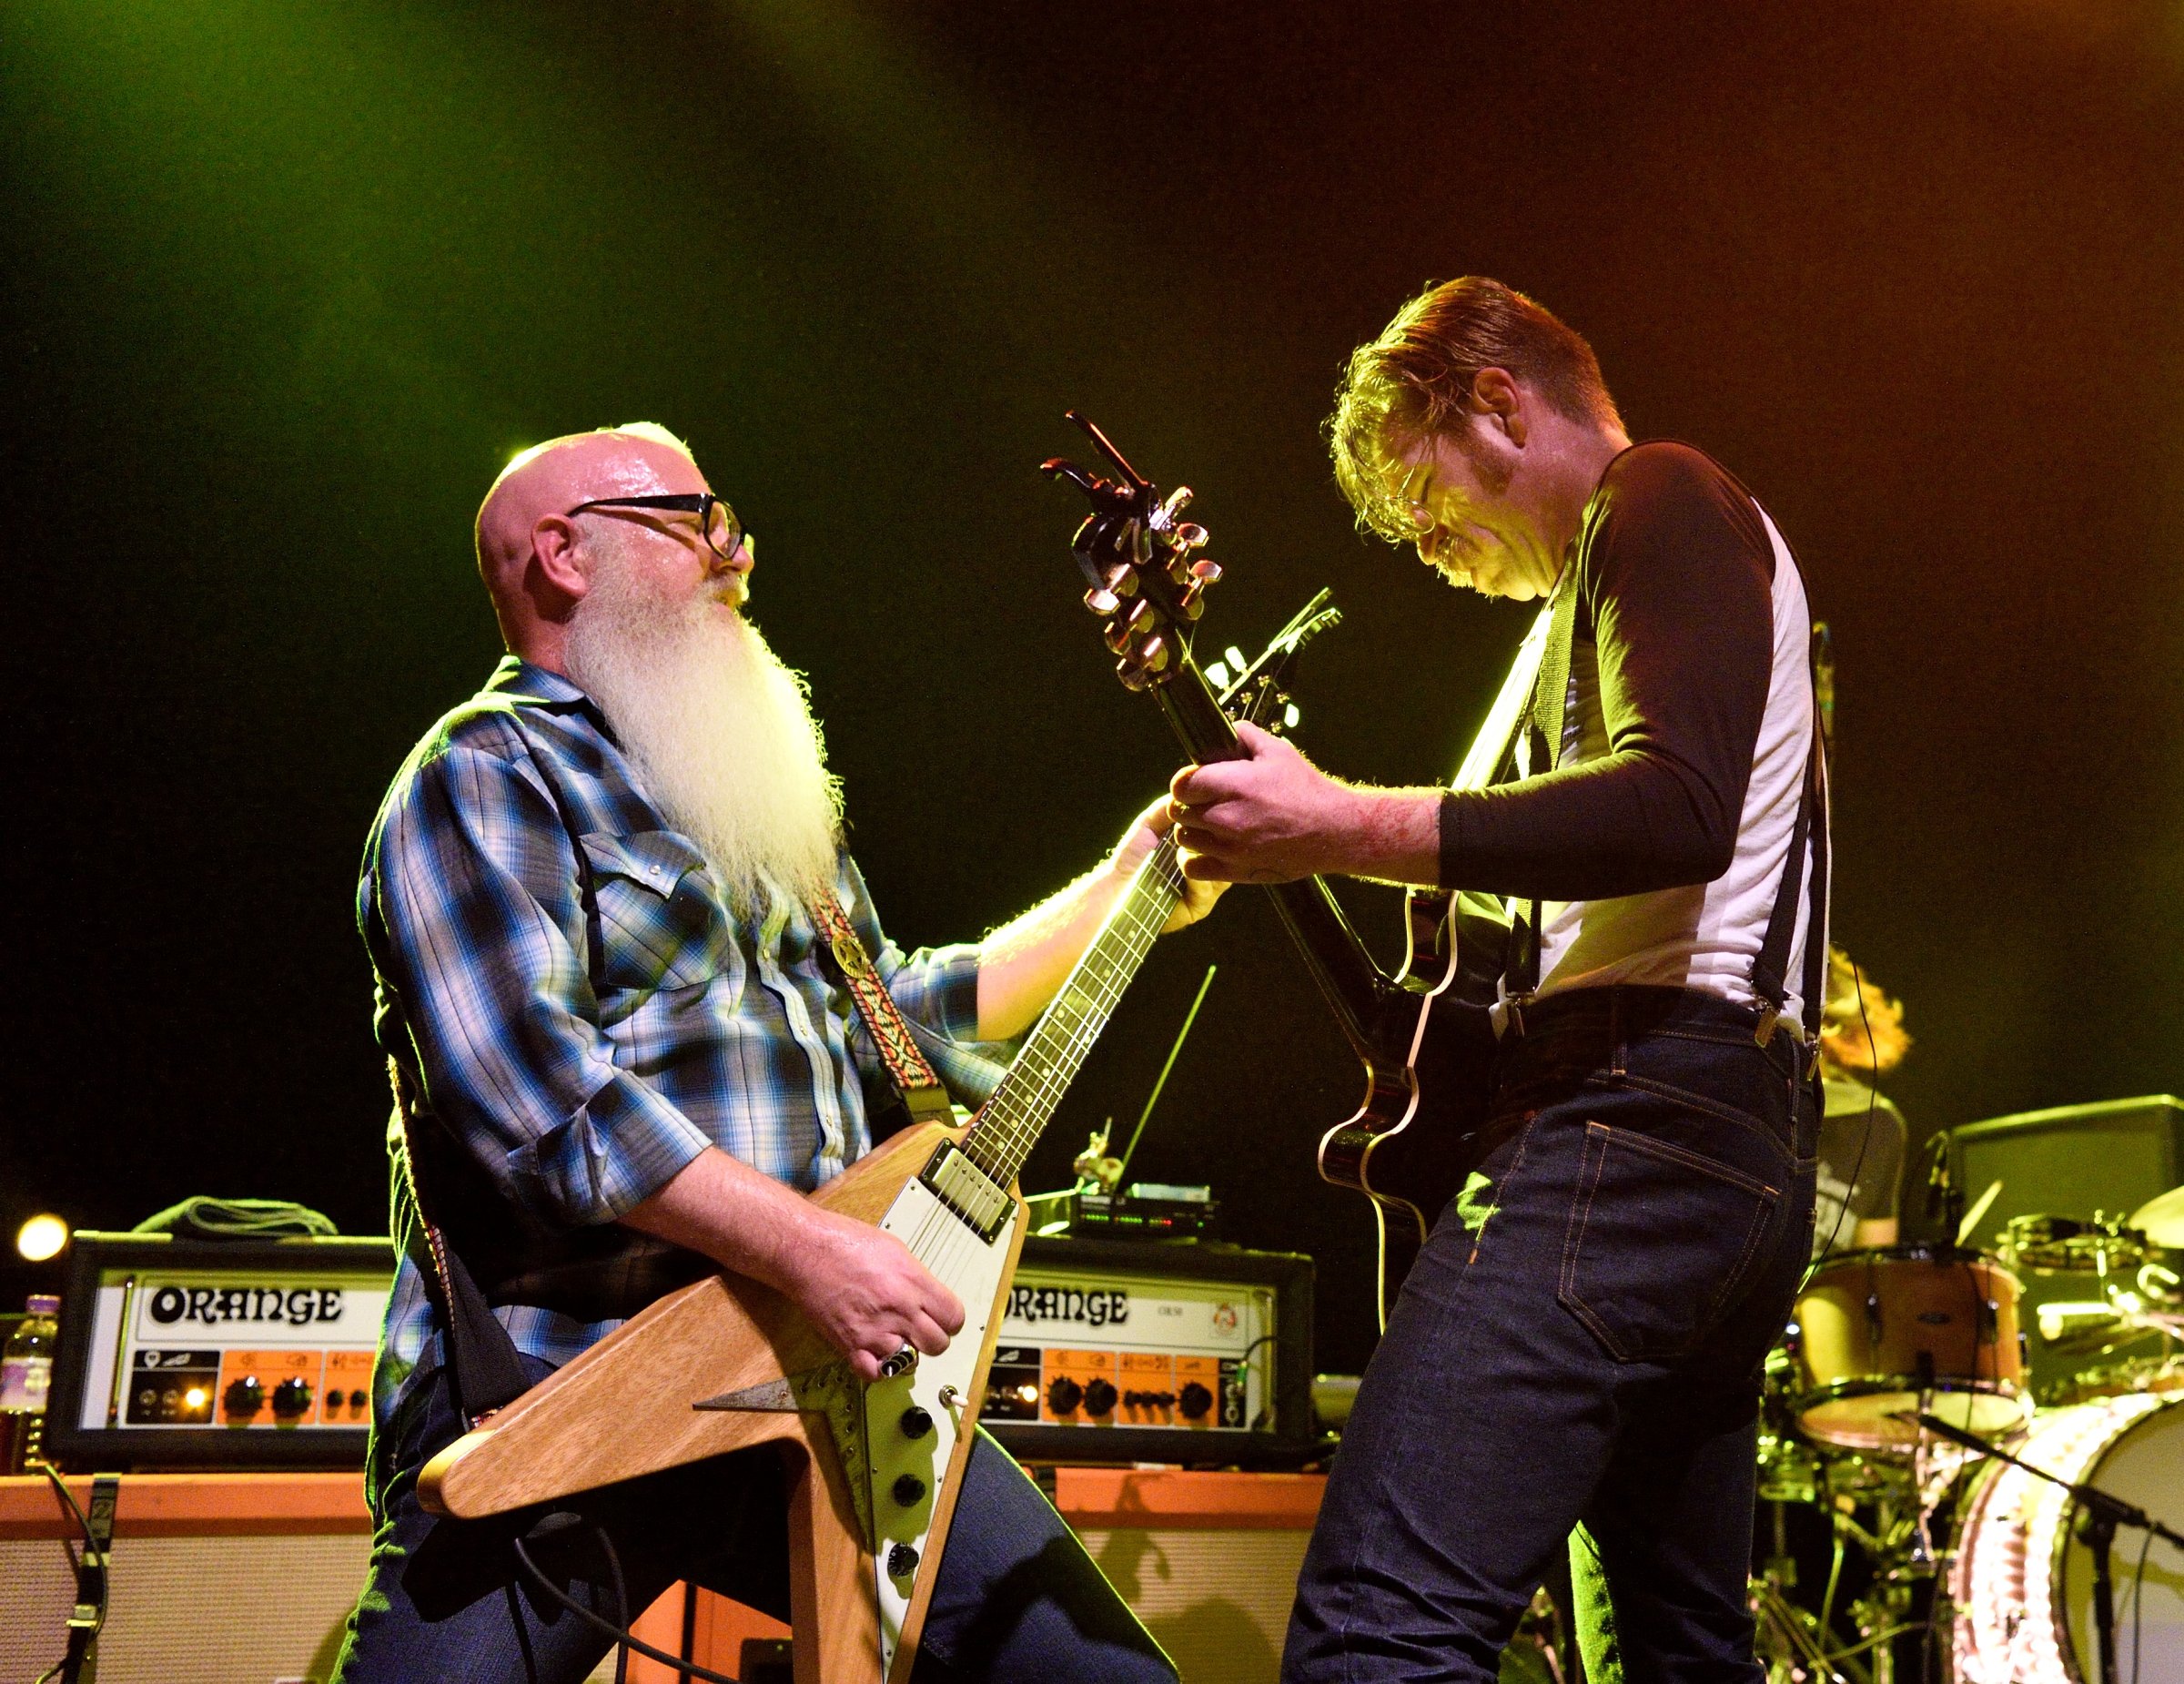 Dave Catching and Jesse Hughes of Eagles Of Death Metal perform at The Forum in London on Nov. 5, 2015.